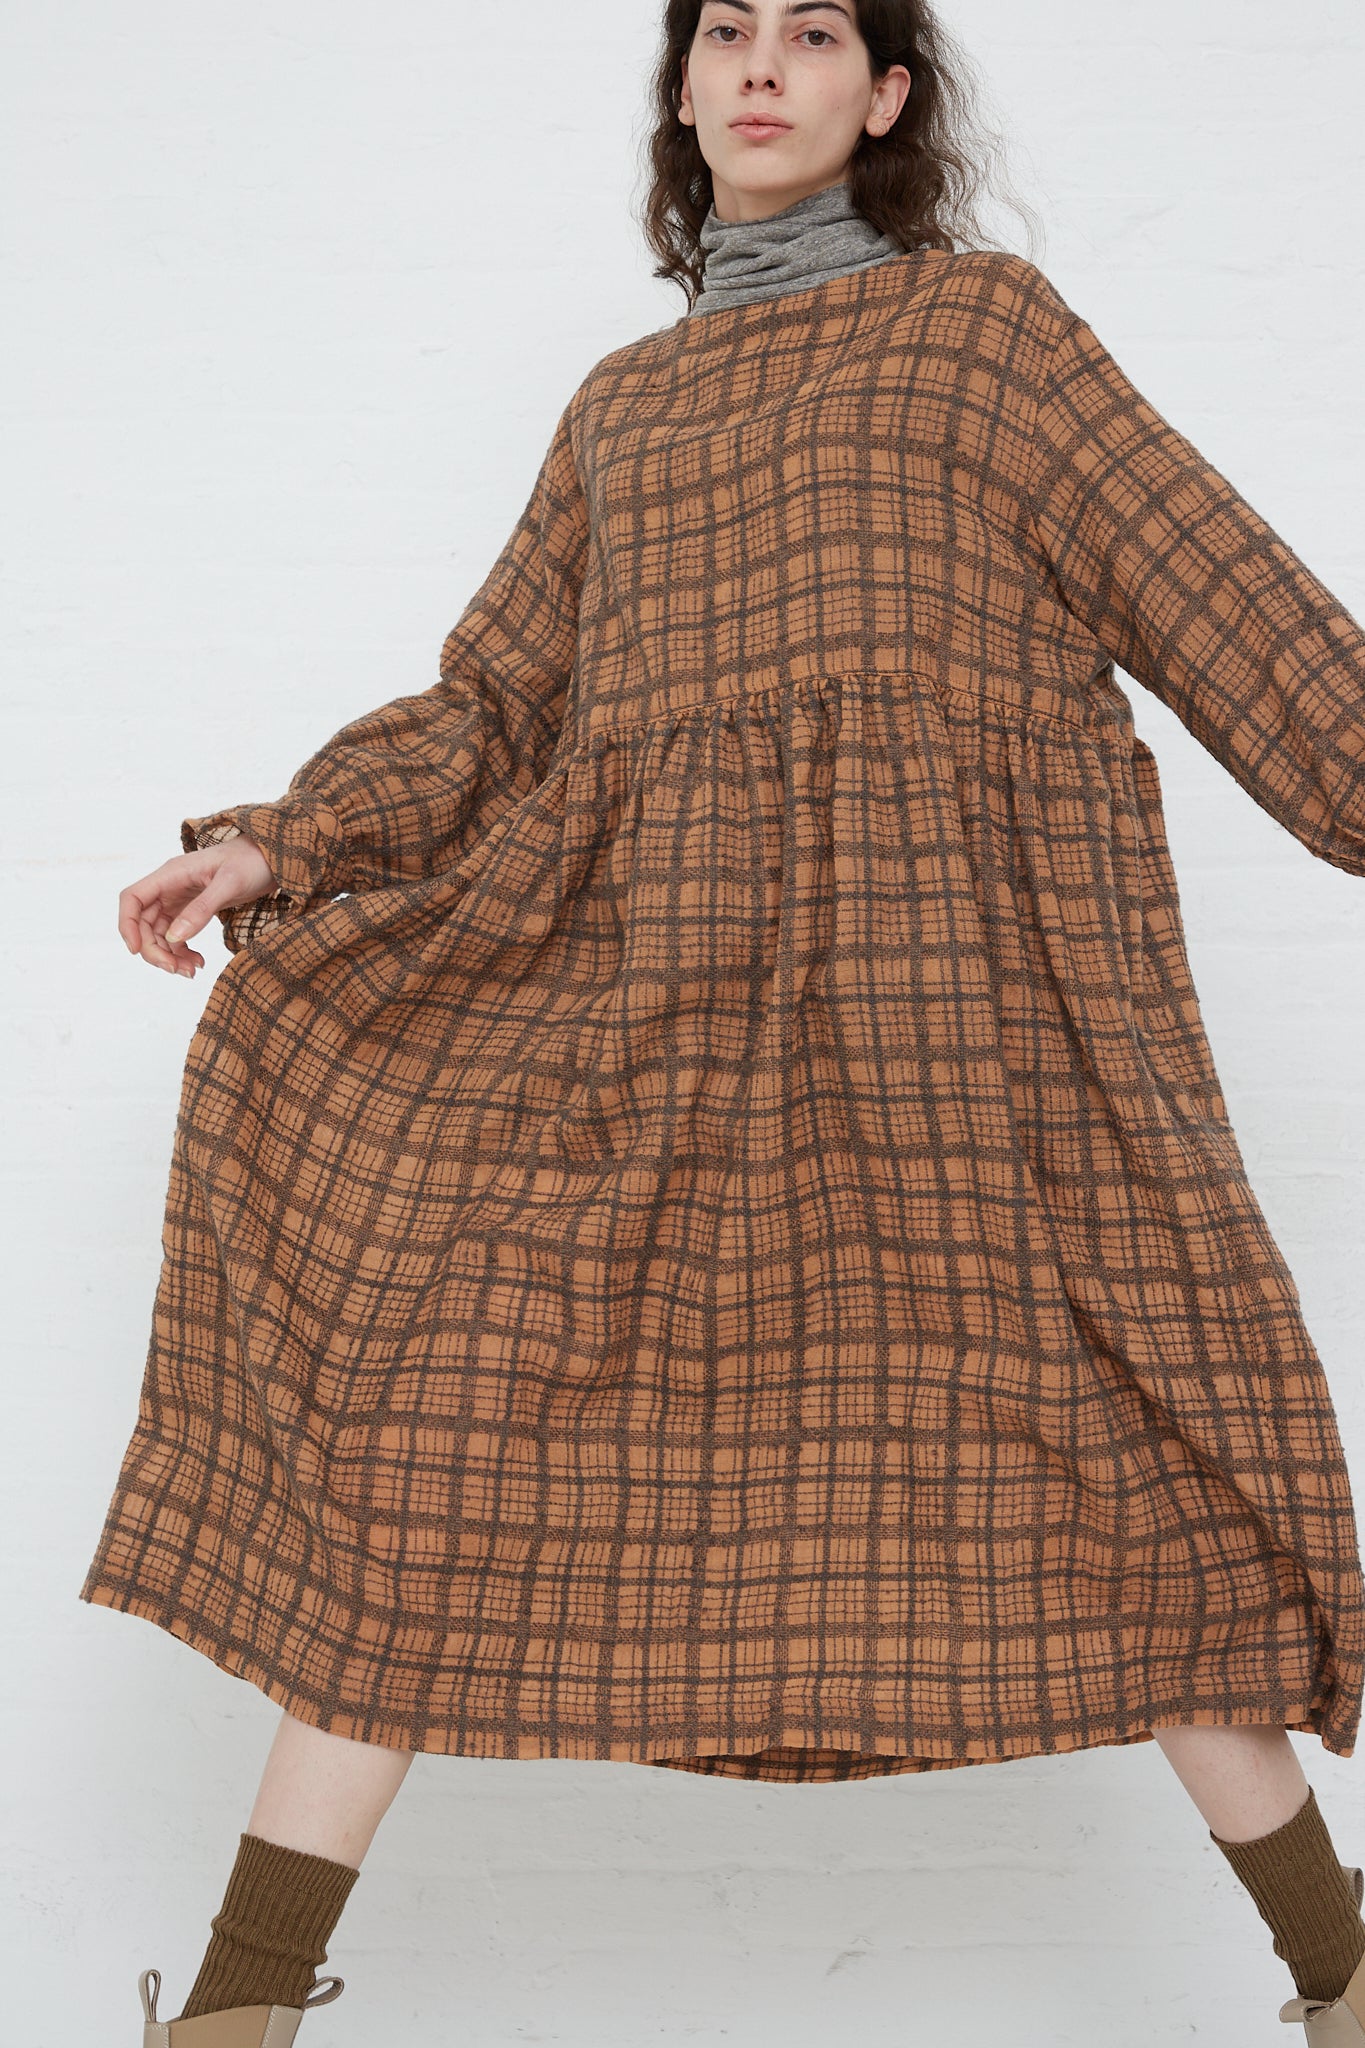 The model is wearing a long sleeve Woven Wool Check Dress in Terracotta by Ichi Antiquités.